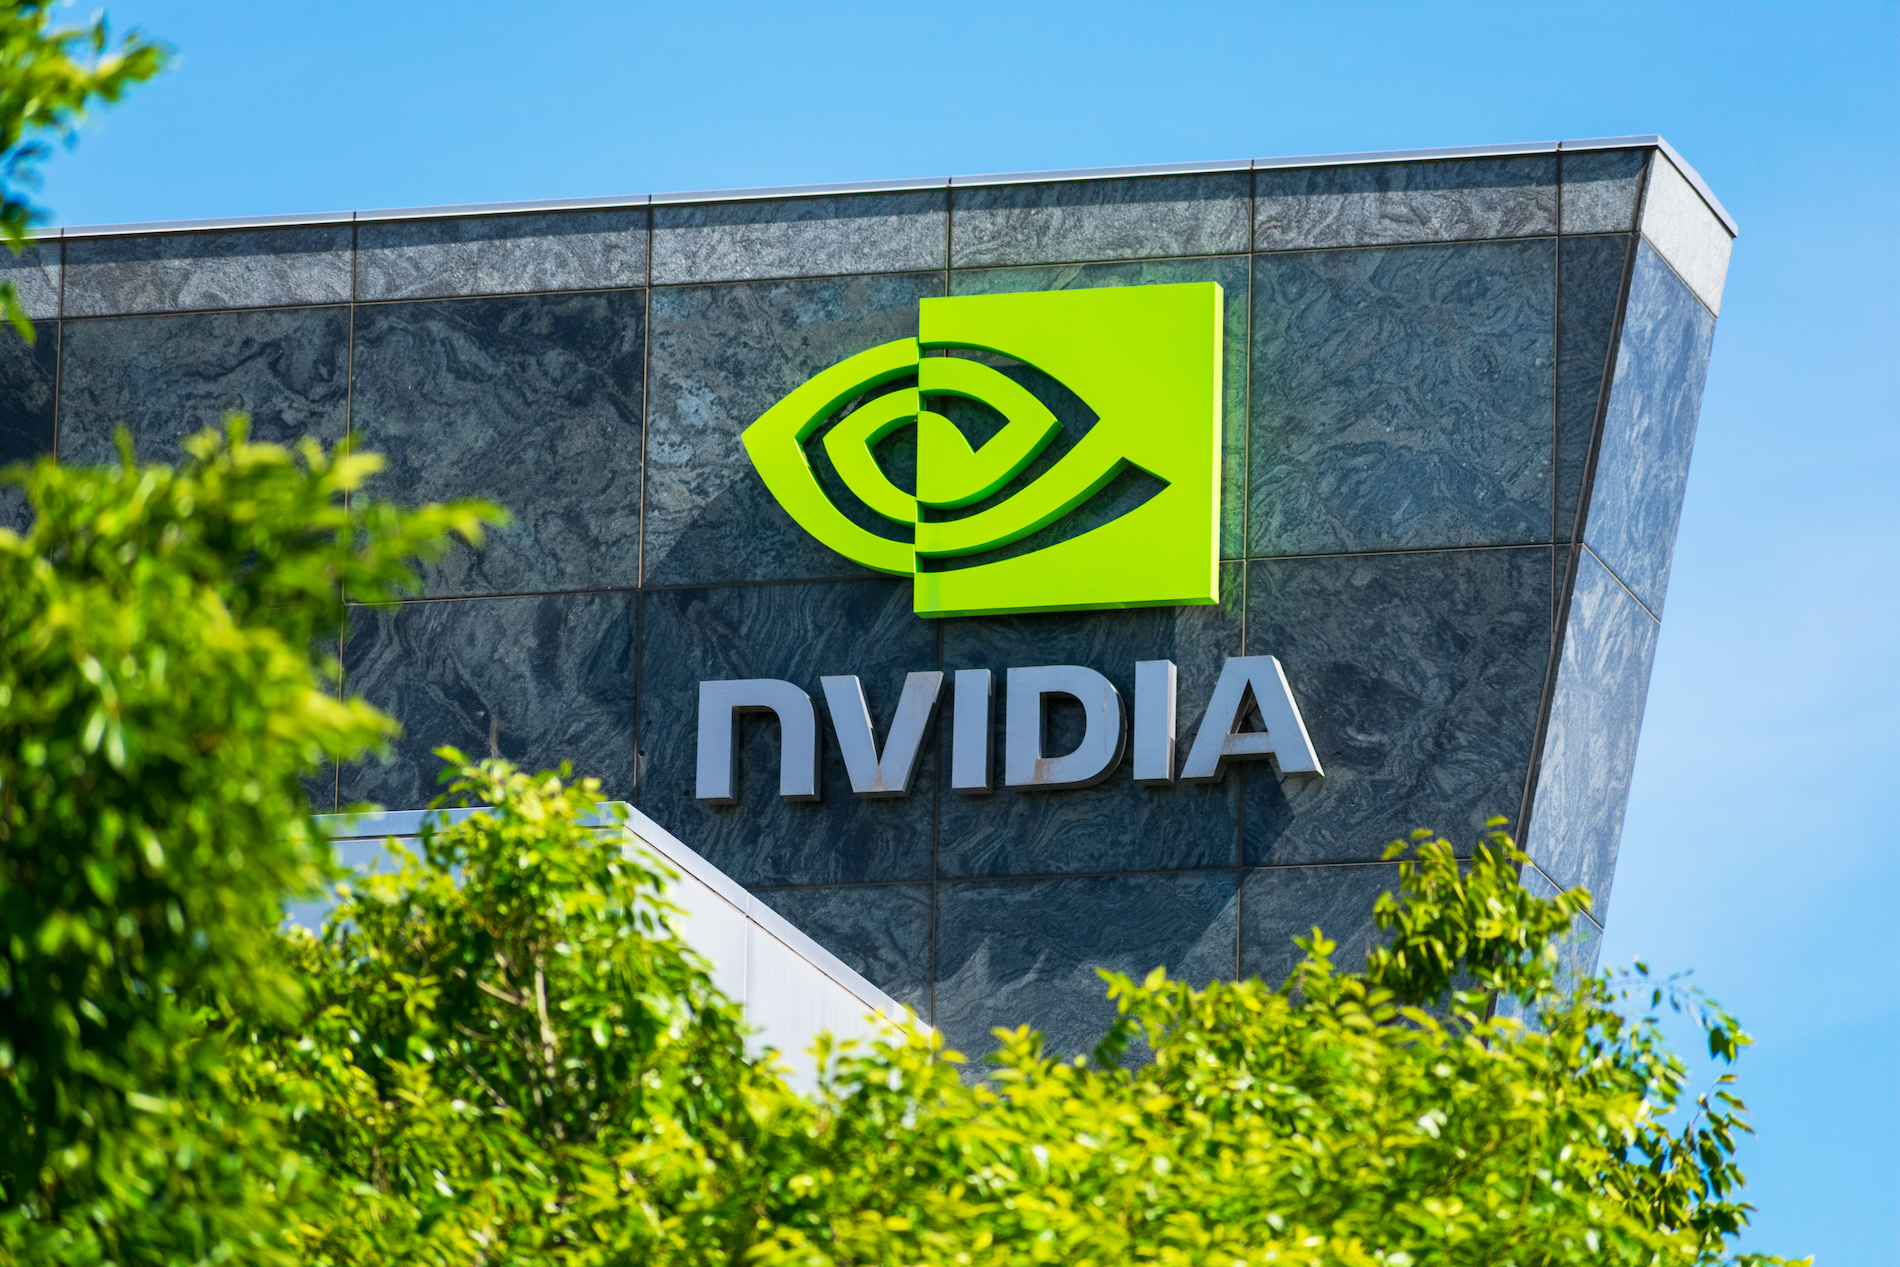 NVIDIA logo on a building with an angular shape. Trees in the foreground. 